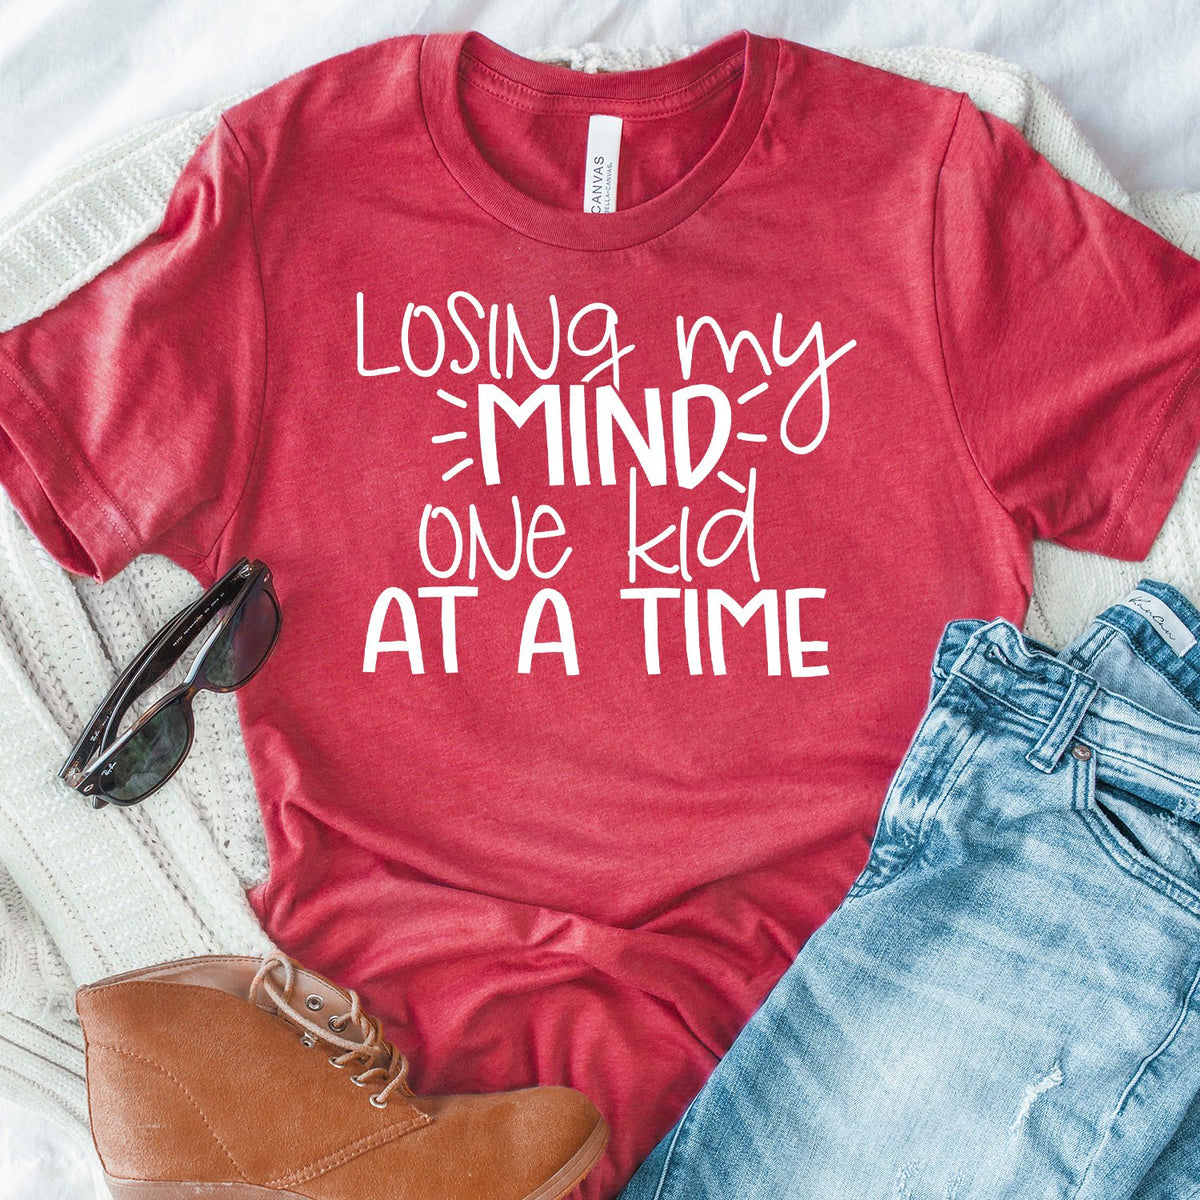 Losing My Mind One Kid At A Time - Short Sleeve Tee Shirt